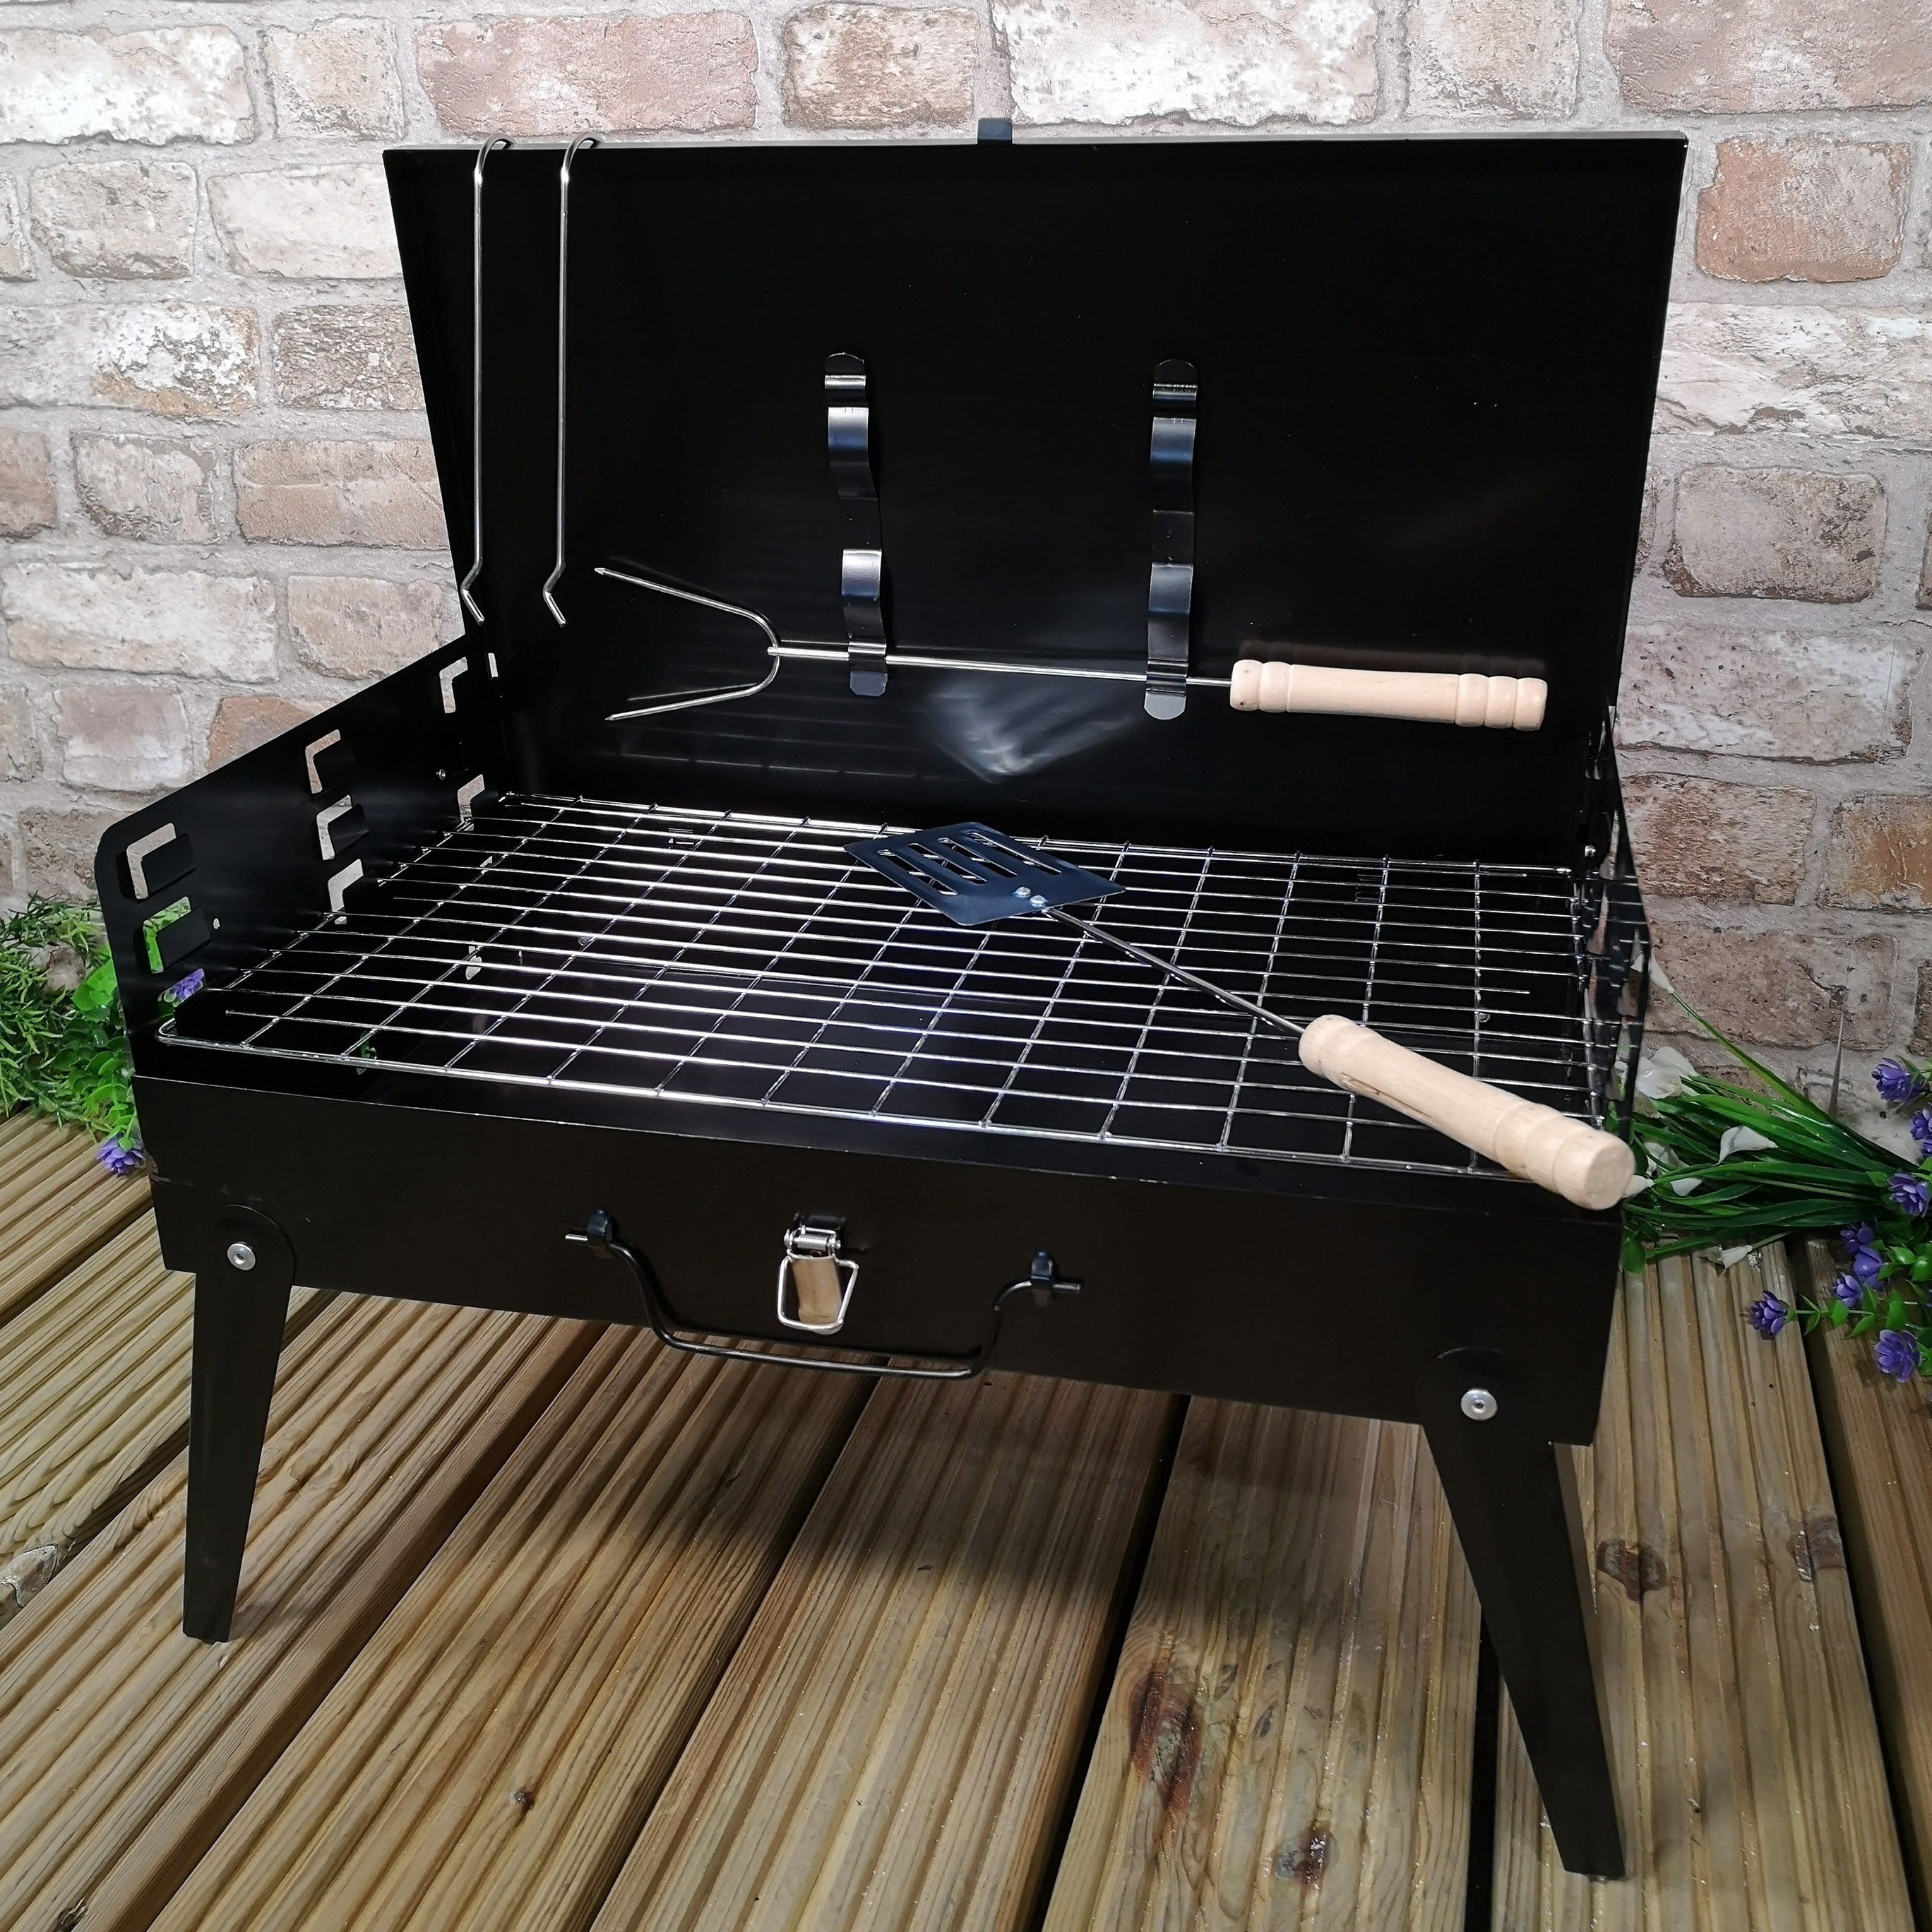 43cm x 26cm Folding Portable Camping Beach Barbecue BBQ with Wind Shield & Tools